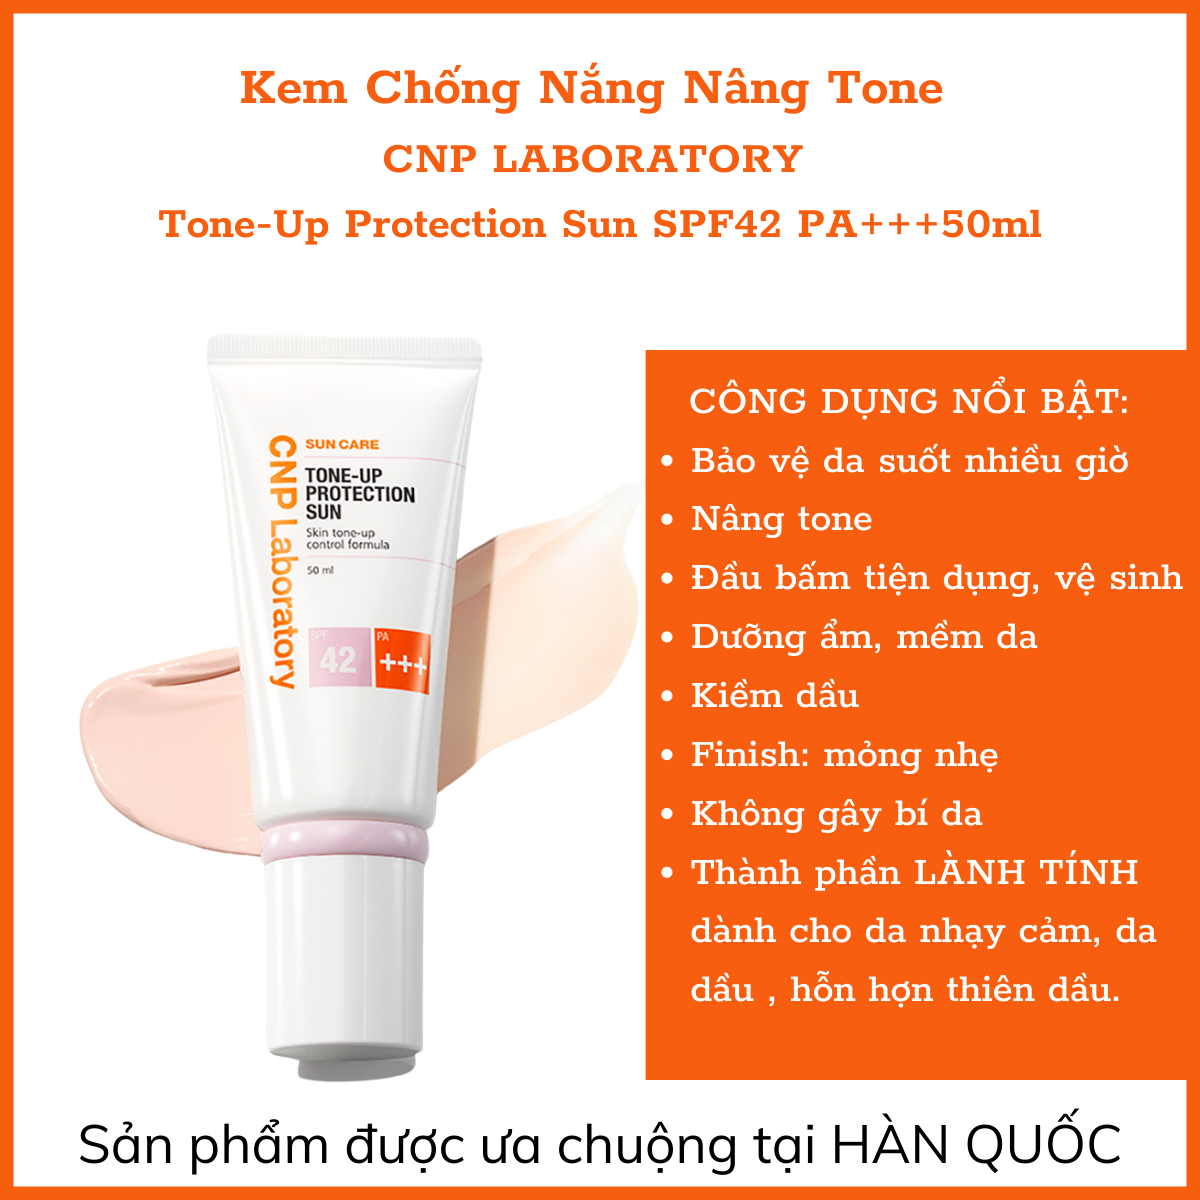 Kem chống nắng CNP Laboratory Tone-Up Protection Sun